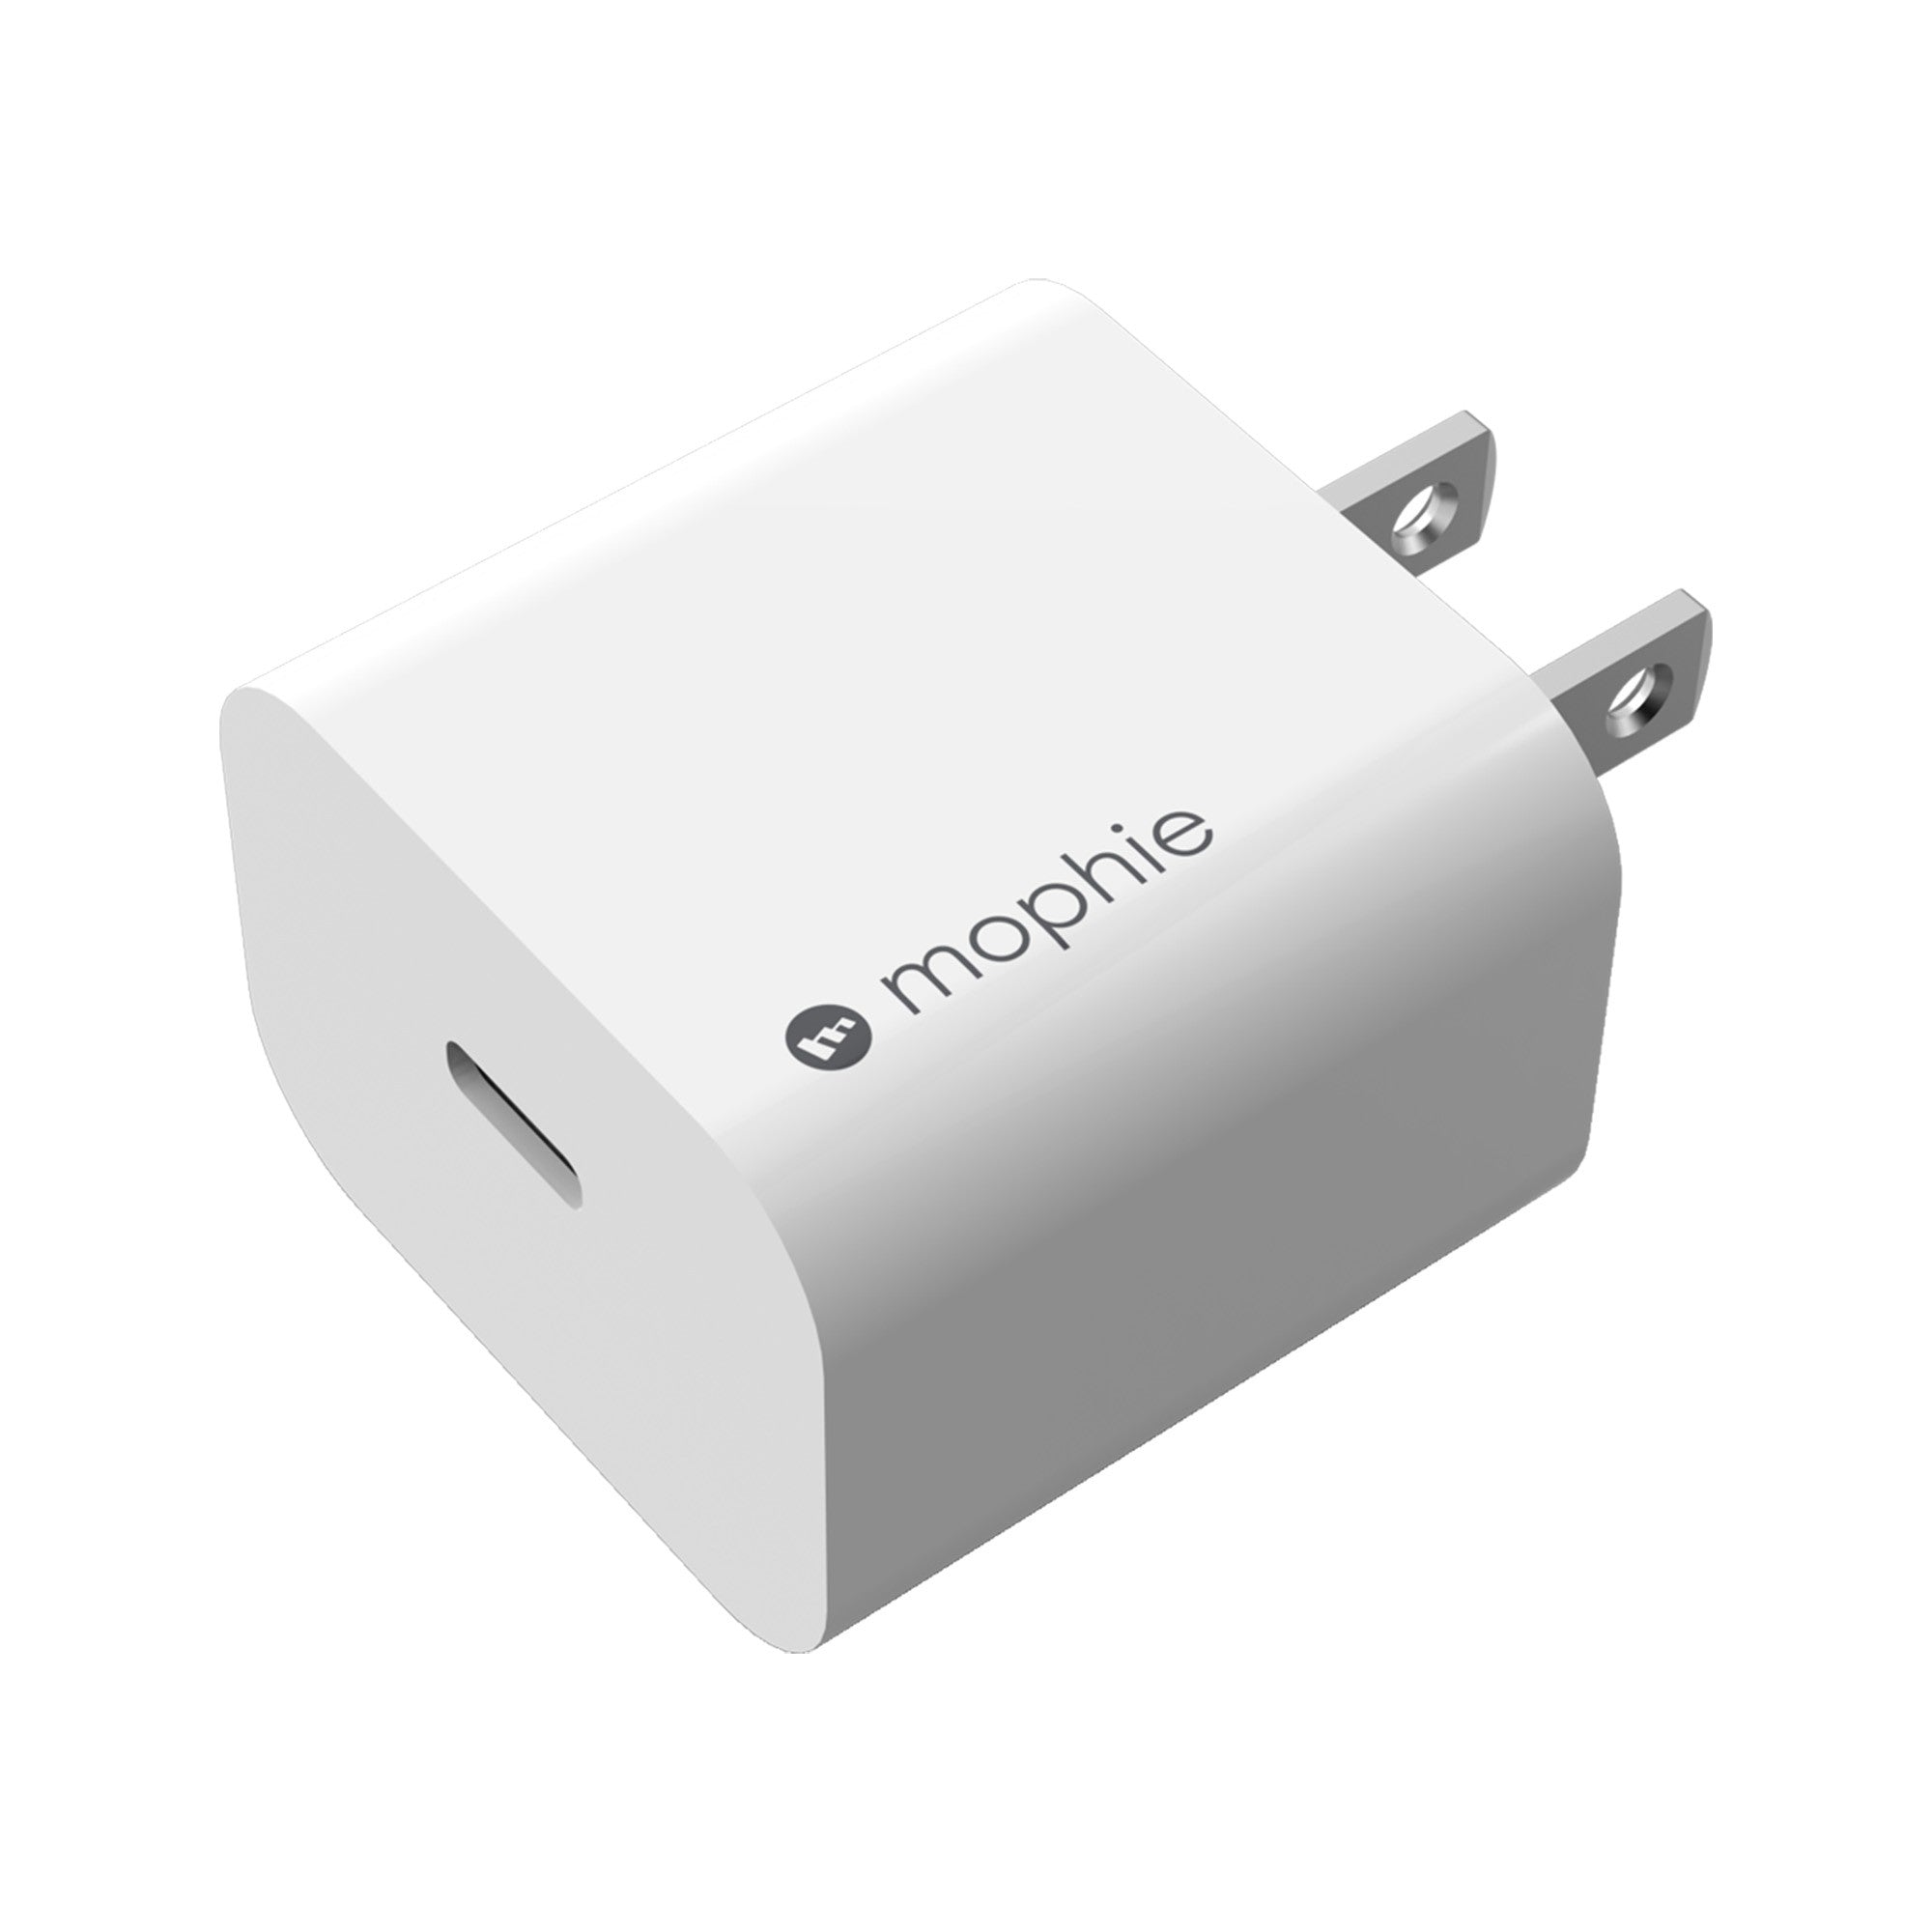 Mophie 20W USB-C PD Wall Charger - White - 15-11340